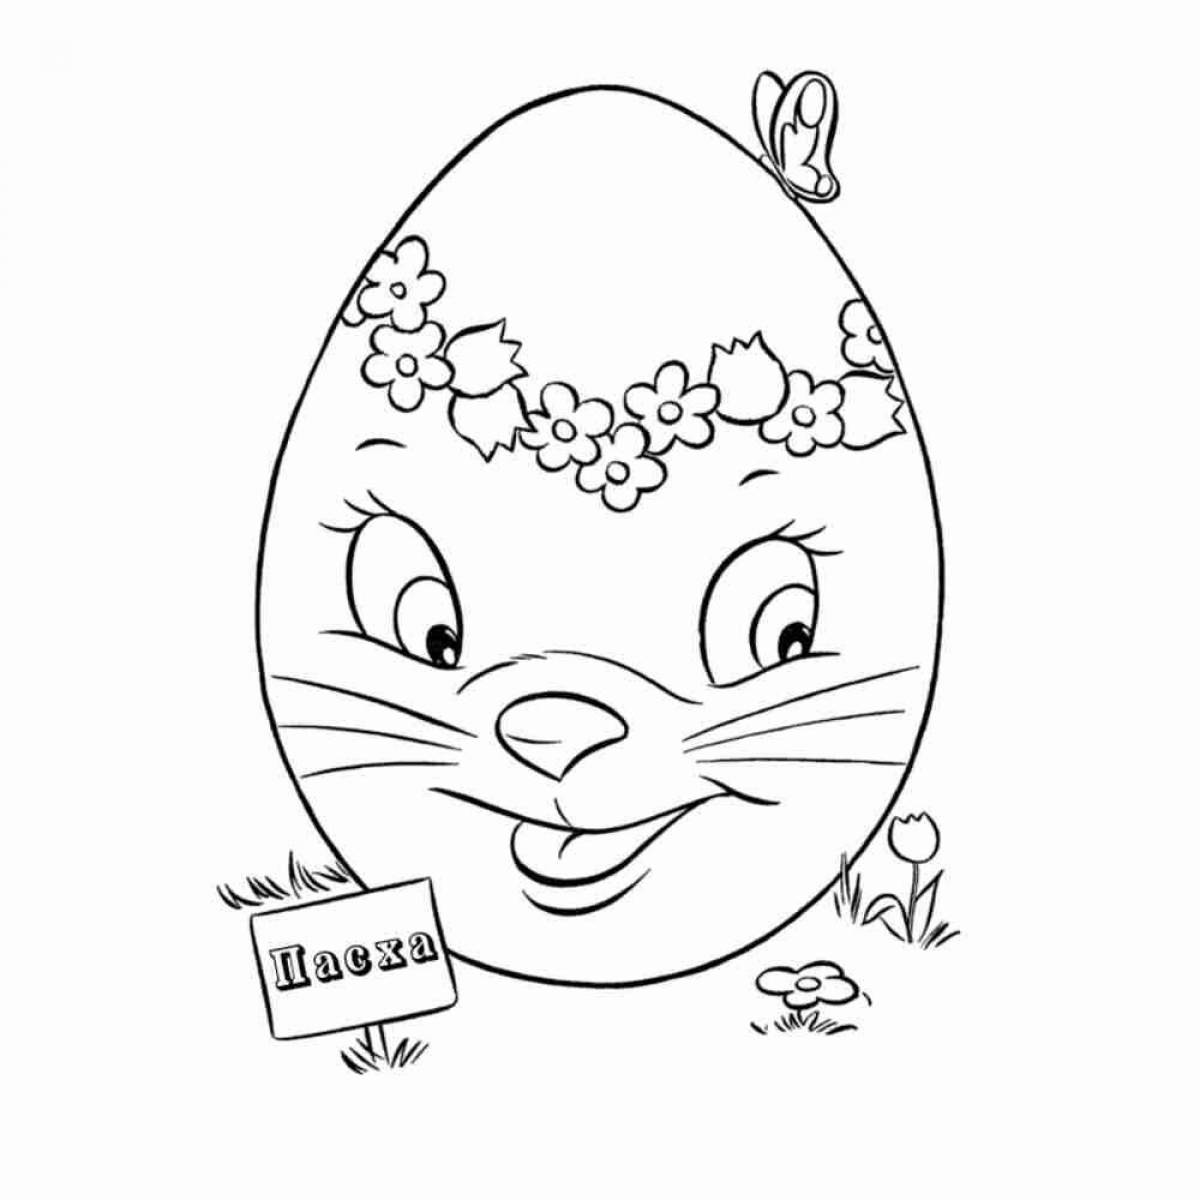 Adorable egg coloring page for kids